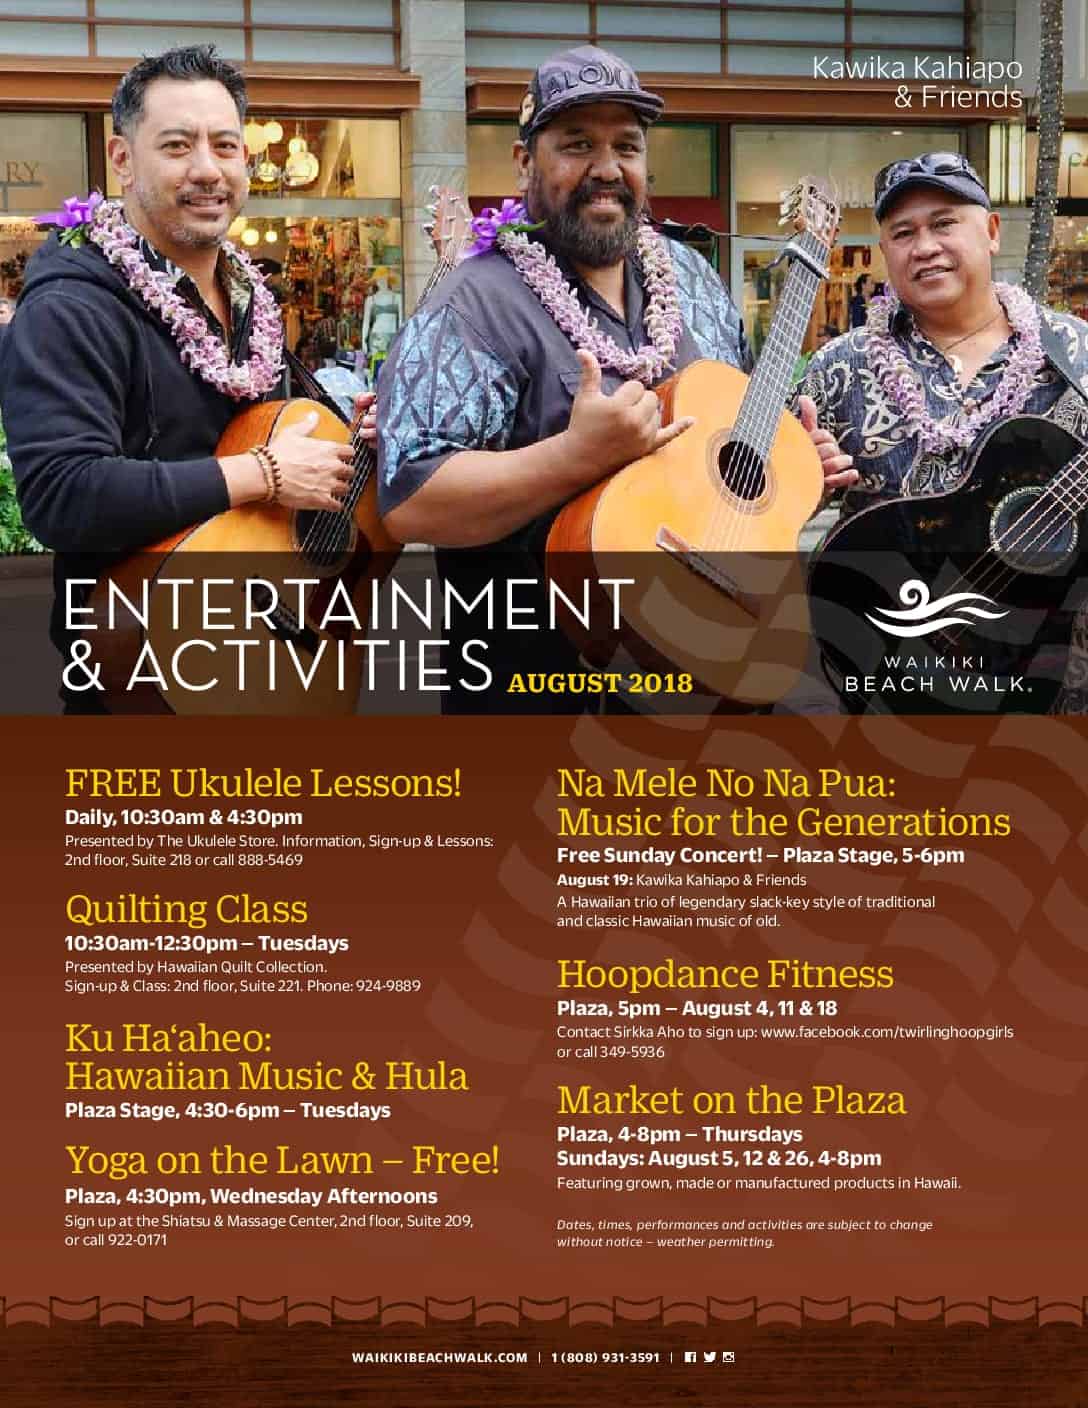 Events for August at Waikiki Beach Walk Oahu's Best Coupons